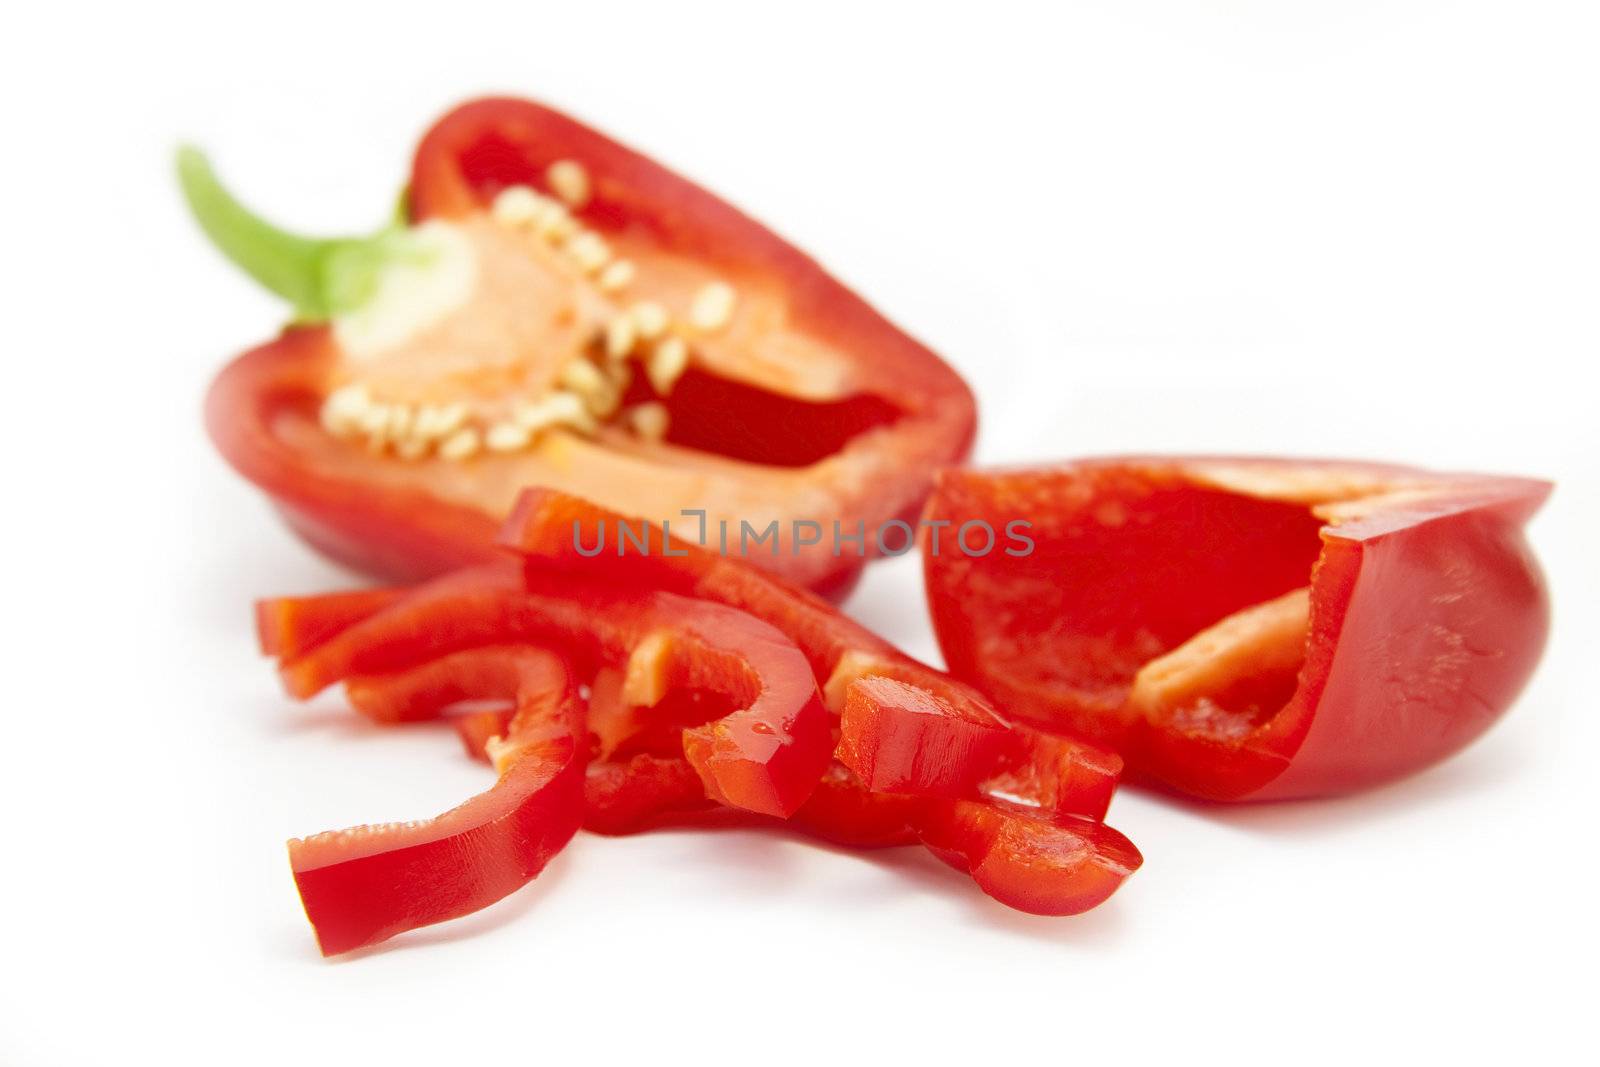 Sliced red pepper (foreground) isolated on a white background